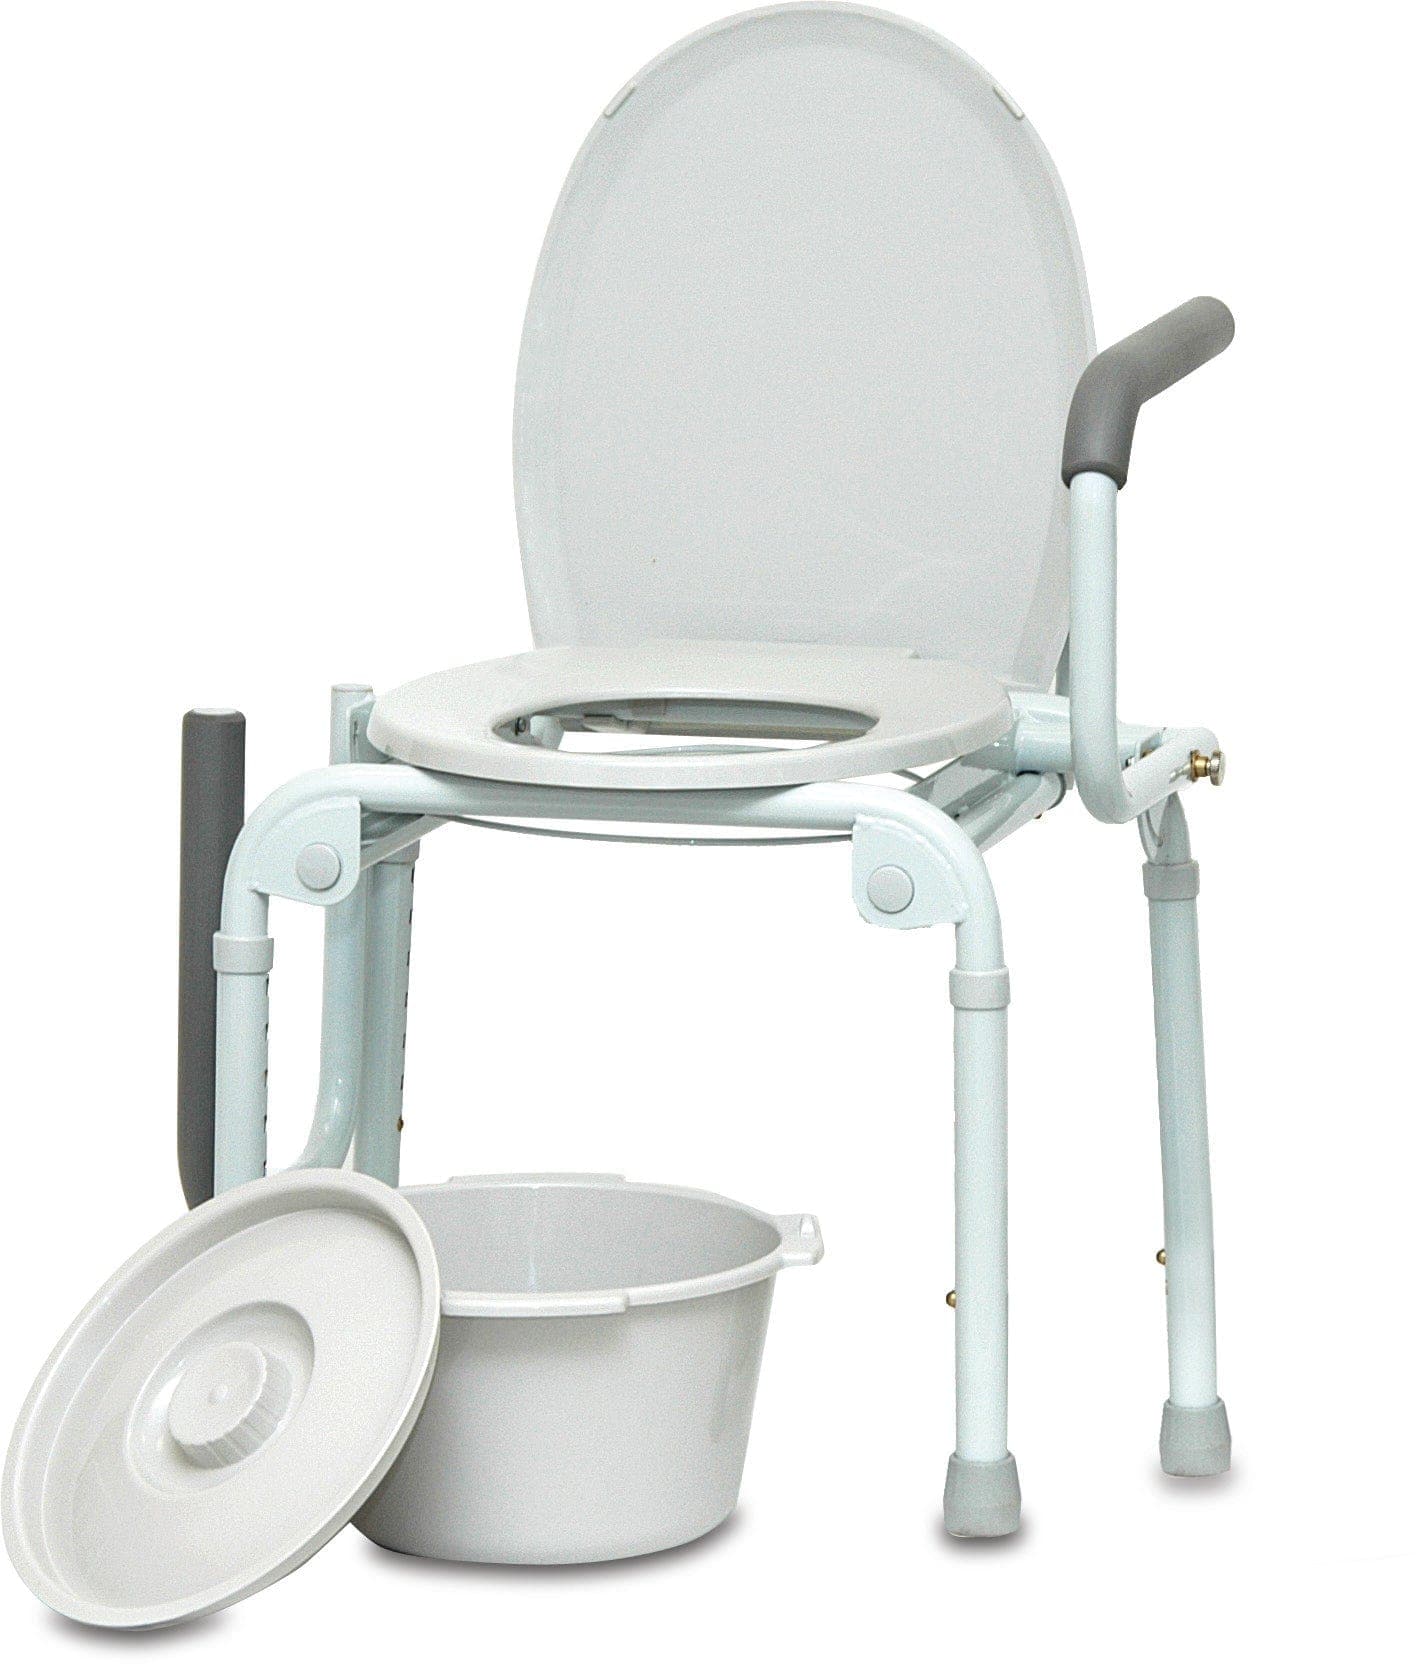 Compass Health Commodes Compass Health ProBasics Steel Drop-Arm Commode,